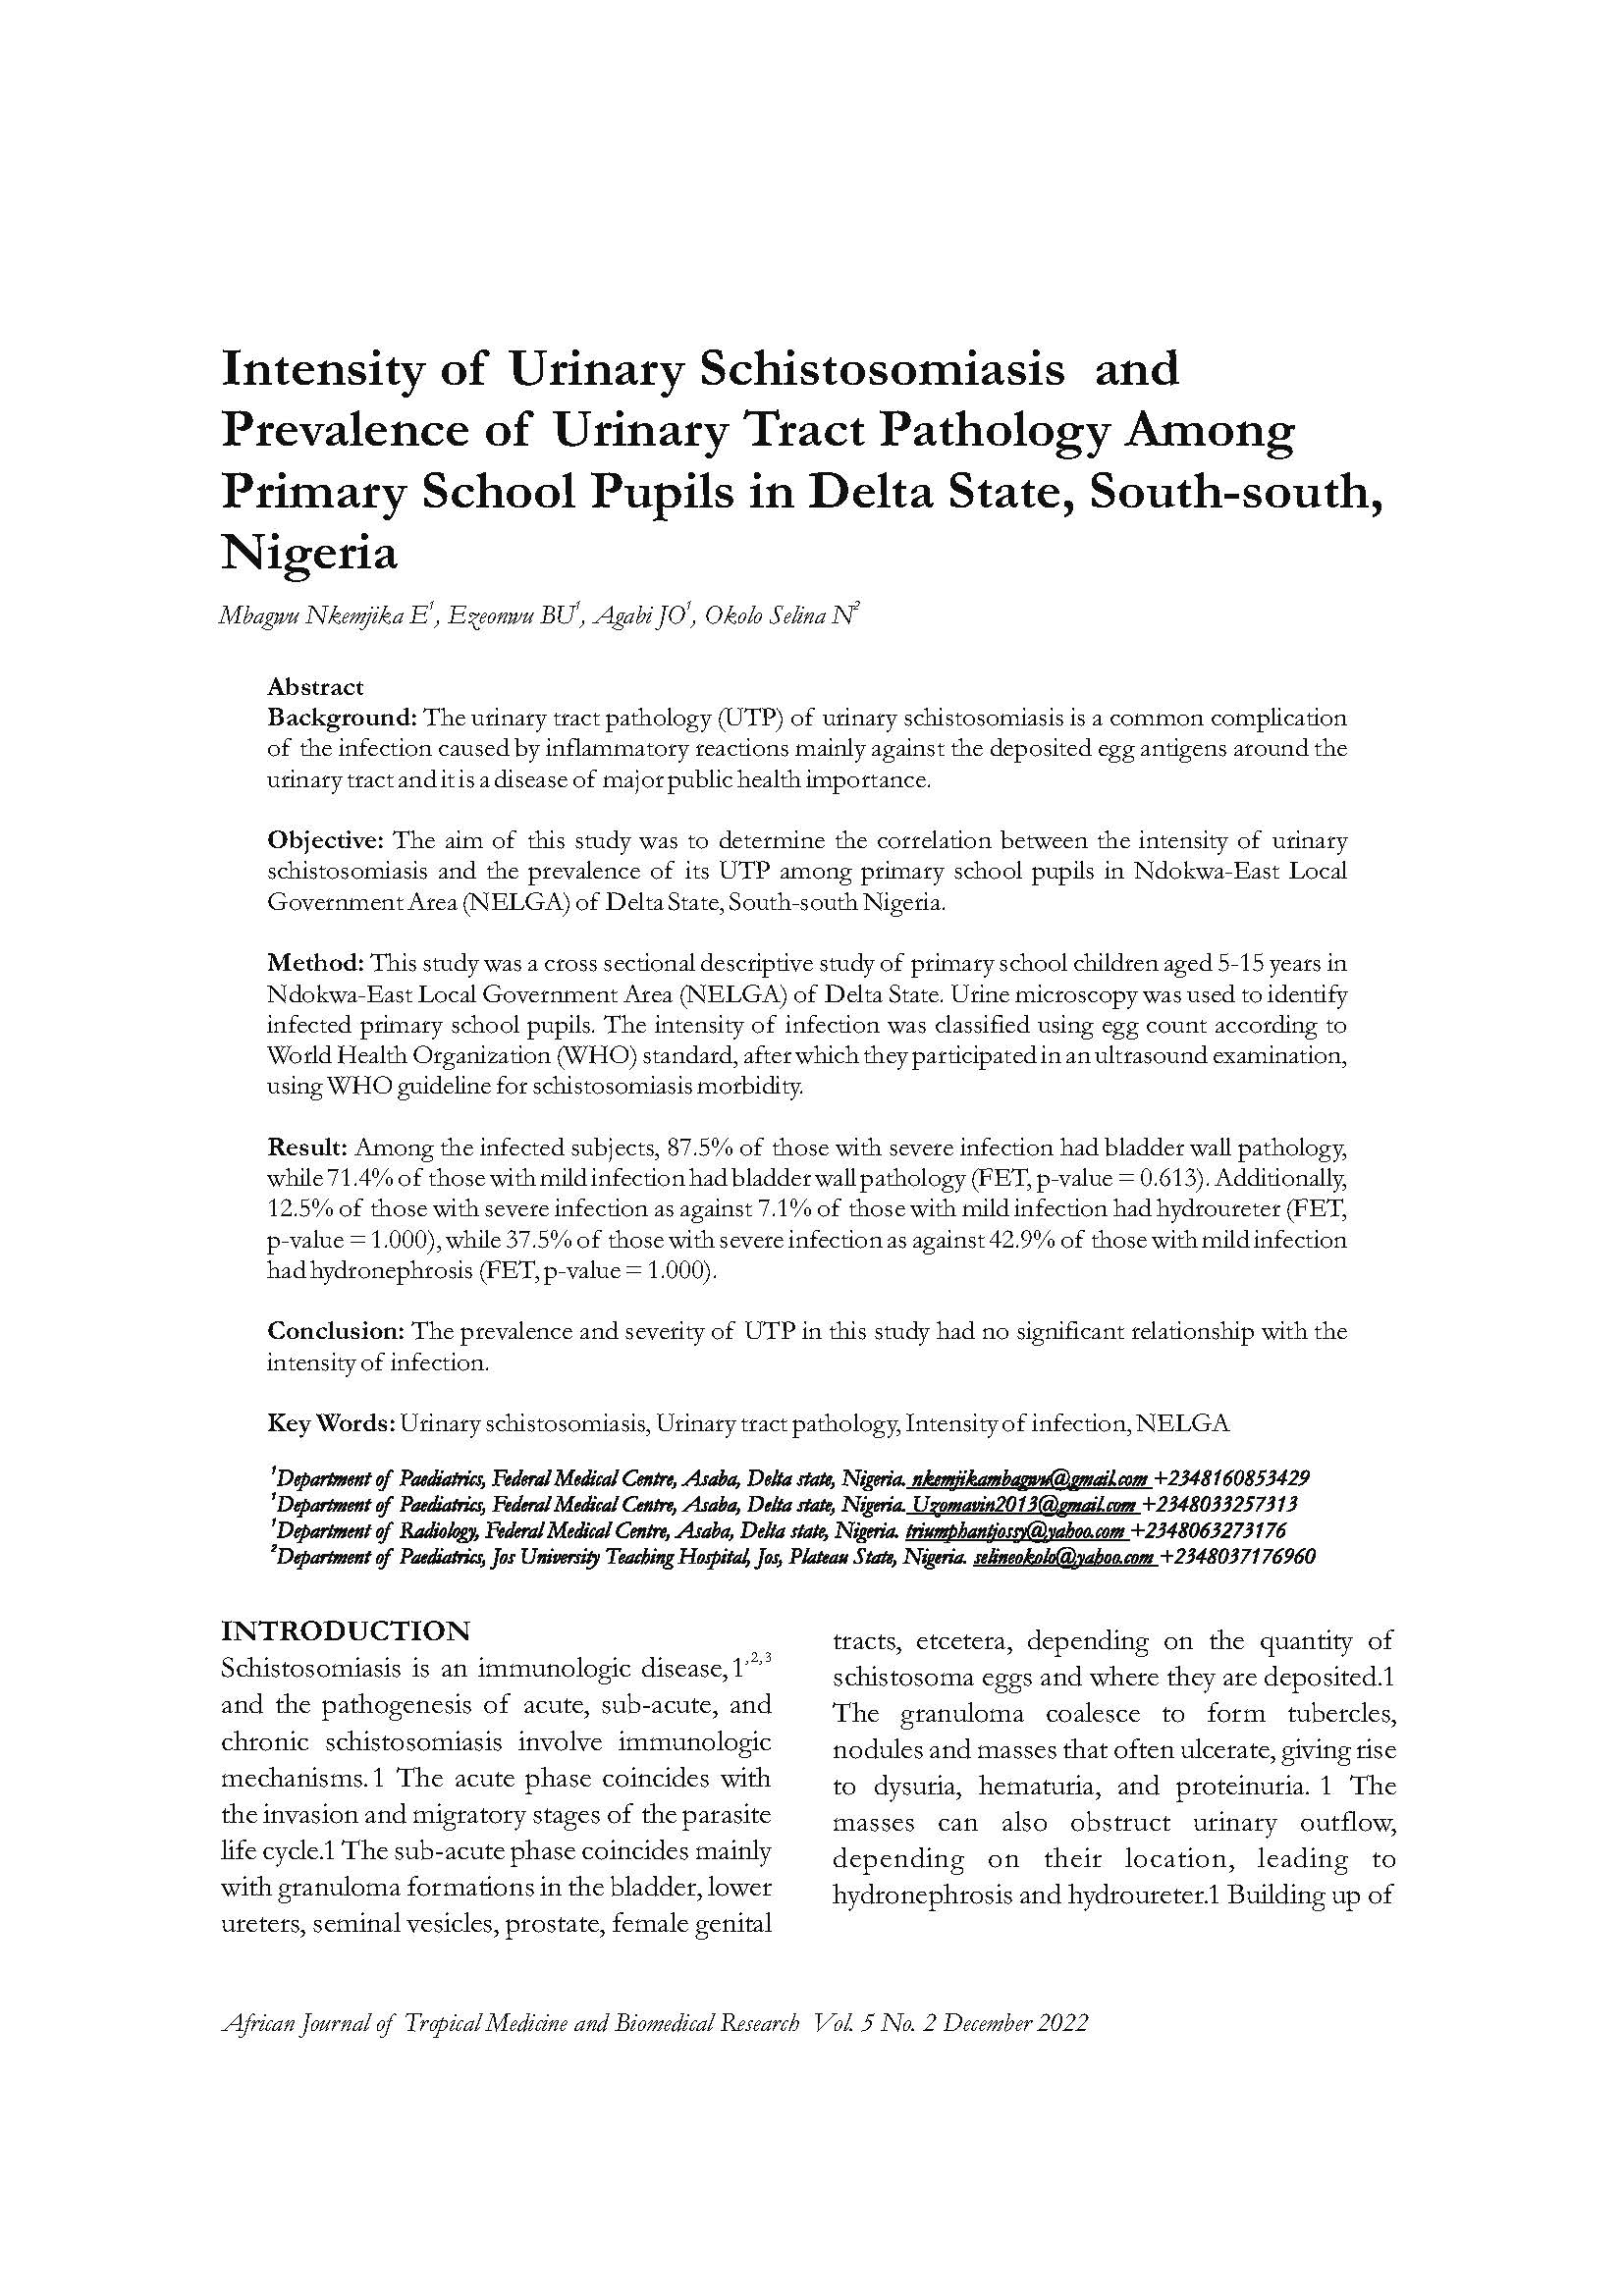 Intensity of Urinary Schistosomiasis and  Prevalence of Urinary Tract Pathology Among  Primary School Pupils in Delta State, South-south,  Nigeria